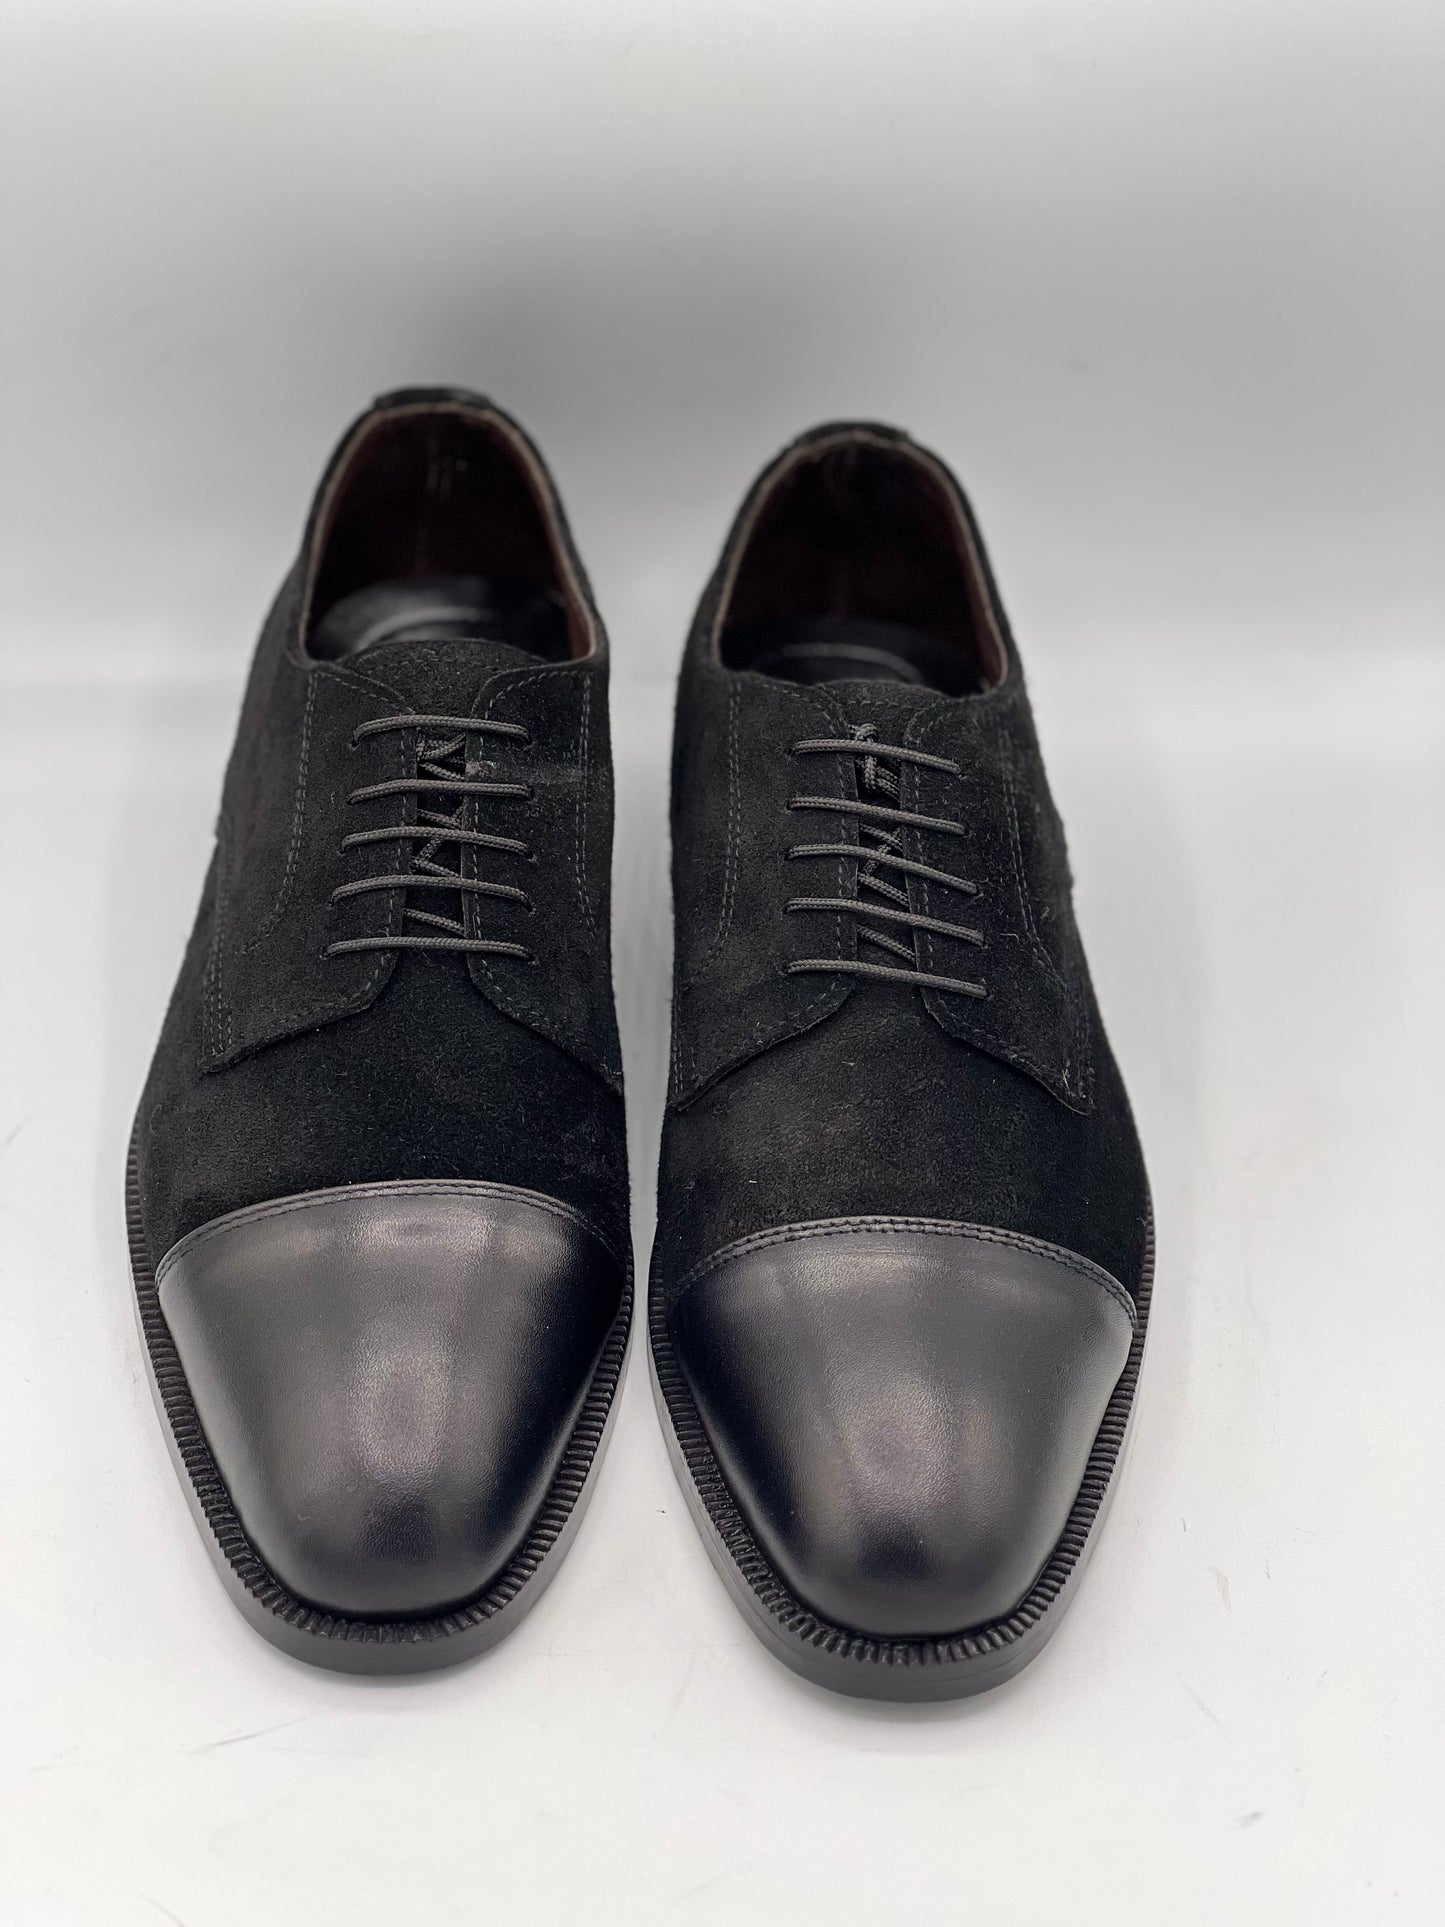 Royal Italian Leather Toe with Suede Formal Laced Shoe